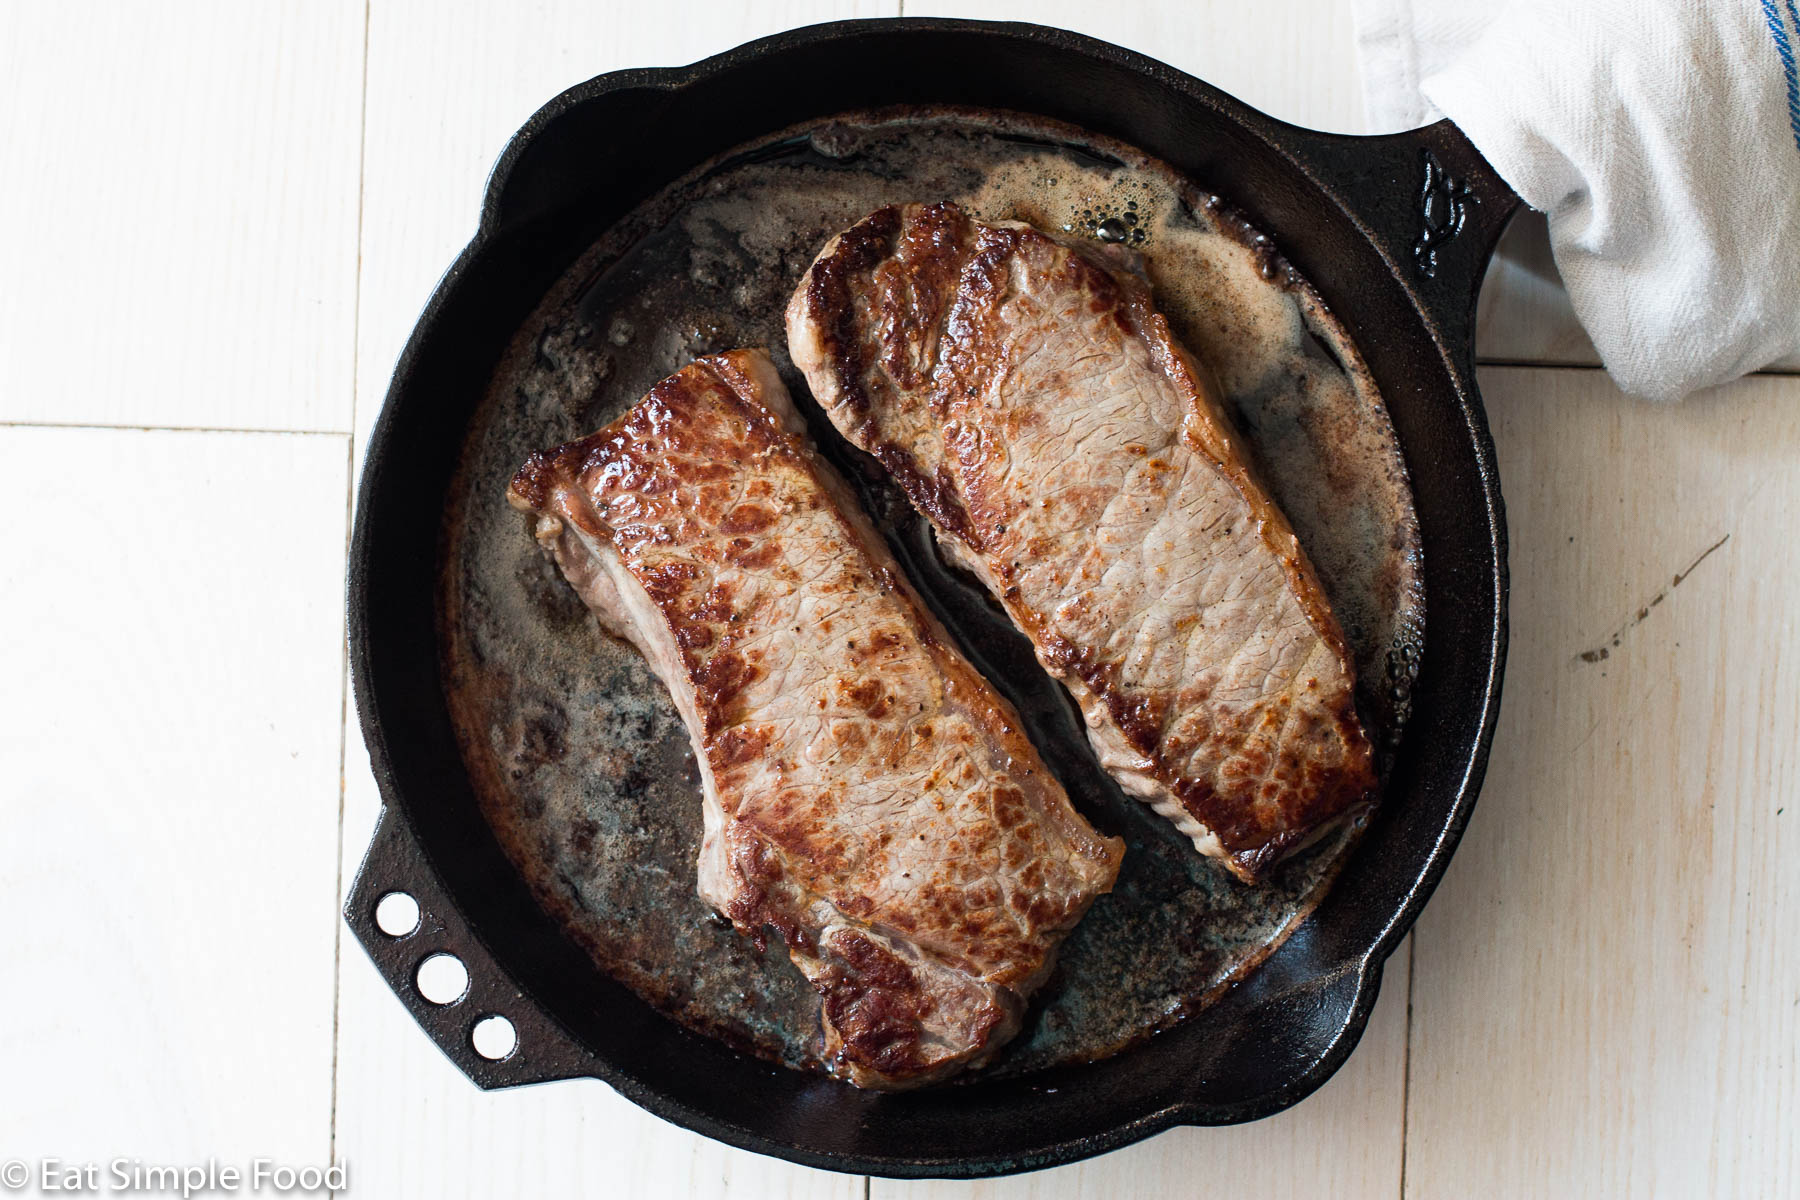 Top down view of two strip steaks in a black cast iron pan with a browned sauce at the bottom of the pan.